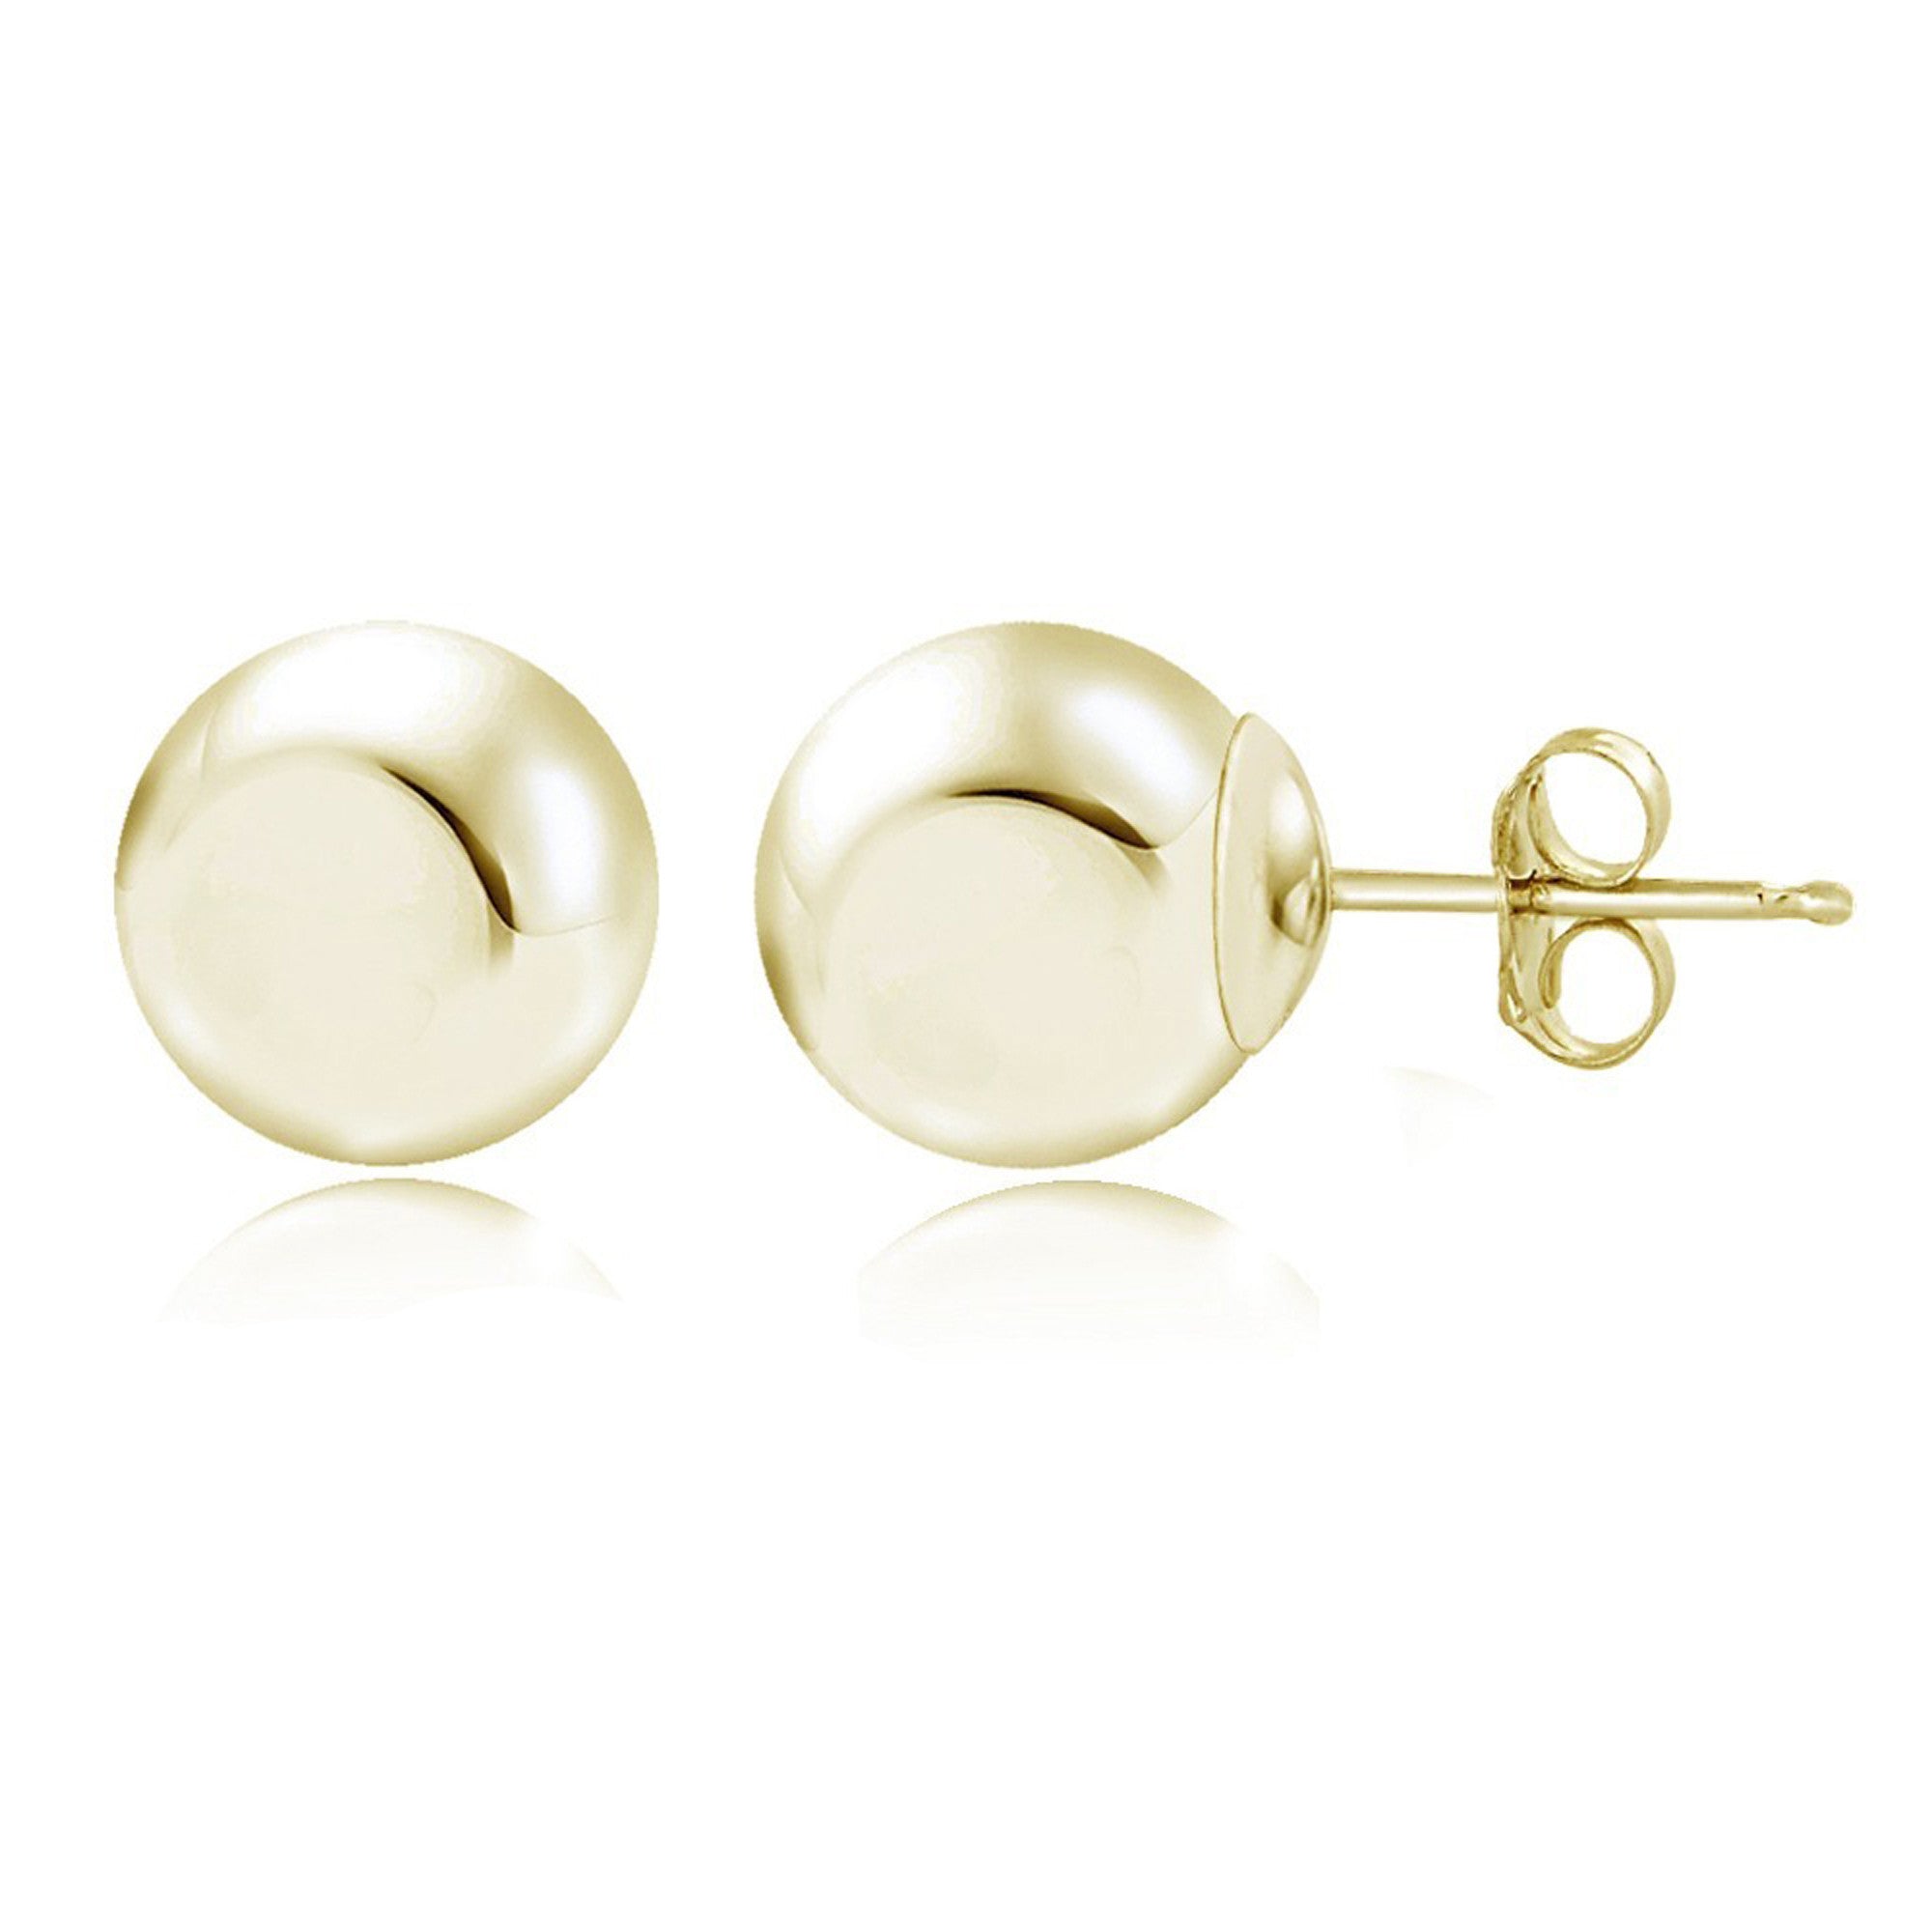 Round Ball Butterfly Clasp Stud Earrings - 5mm Yellow Gold